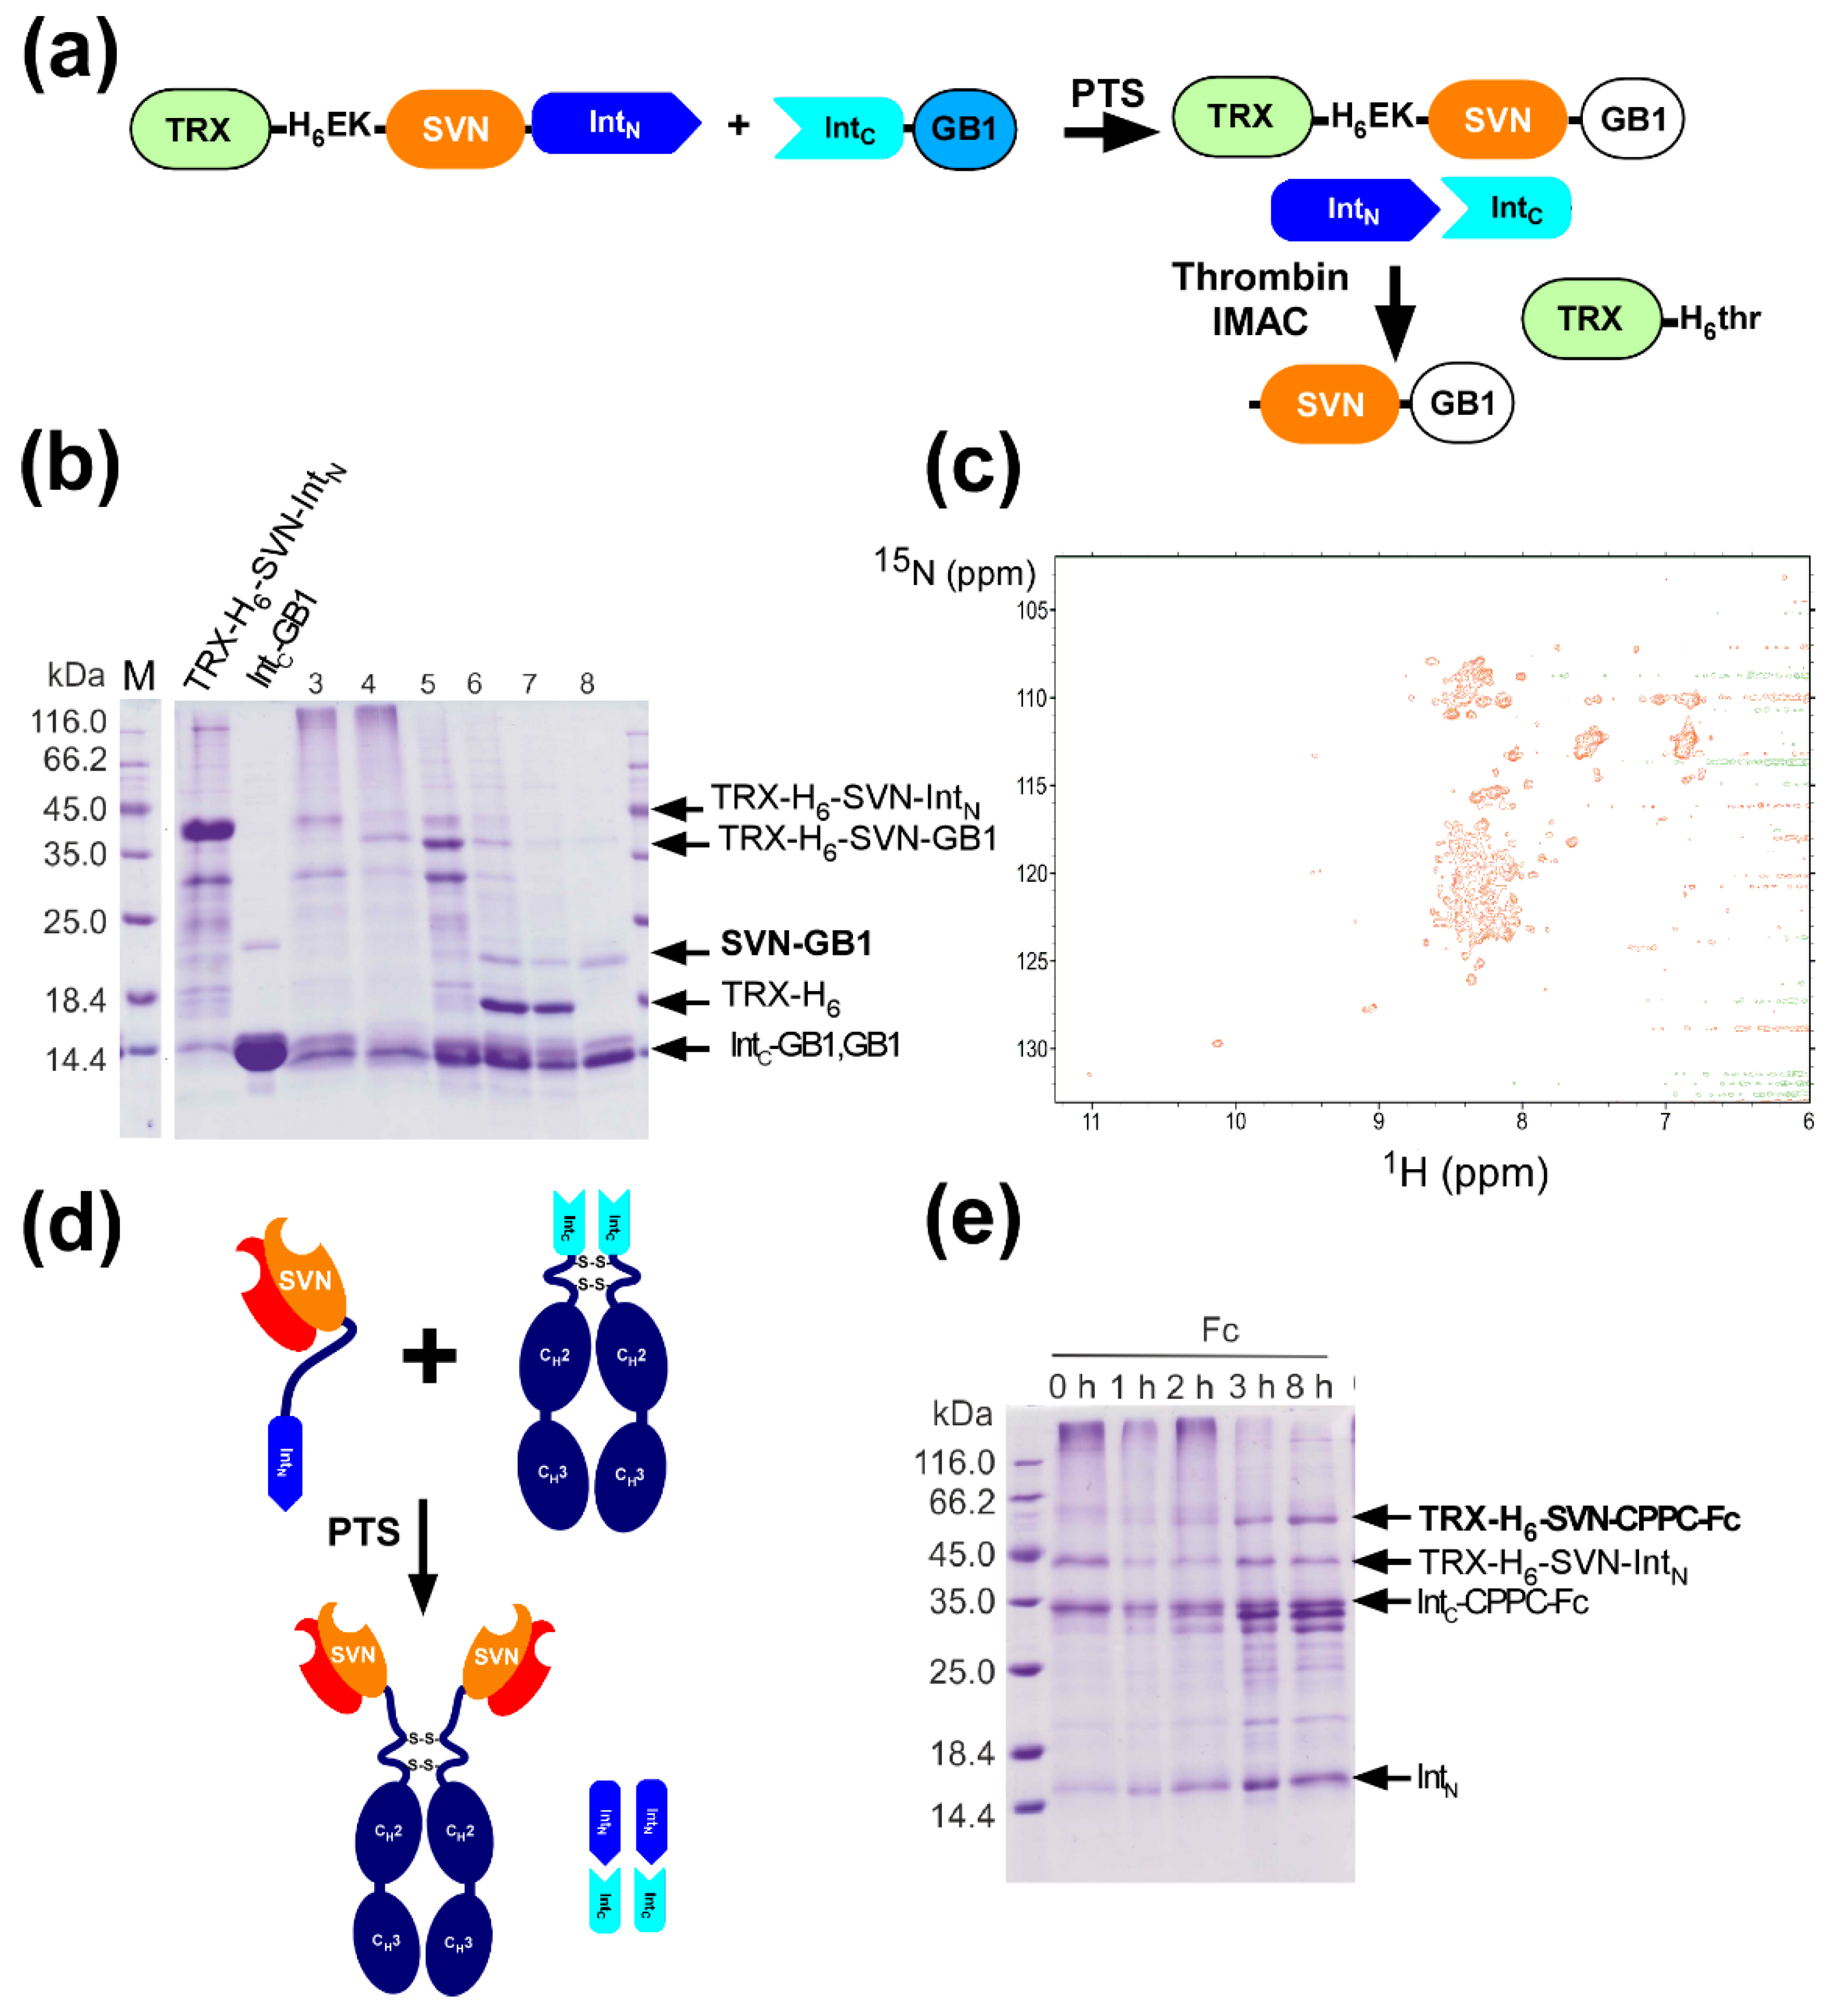 Ijms Free Full Text An Off The Shelf Approach For The Production Of Fc Fusion Proteins By Protein Trans Splicing Towards Generating A Lectibody In Vitro Html